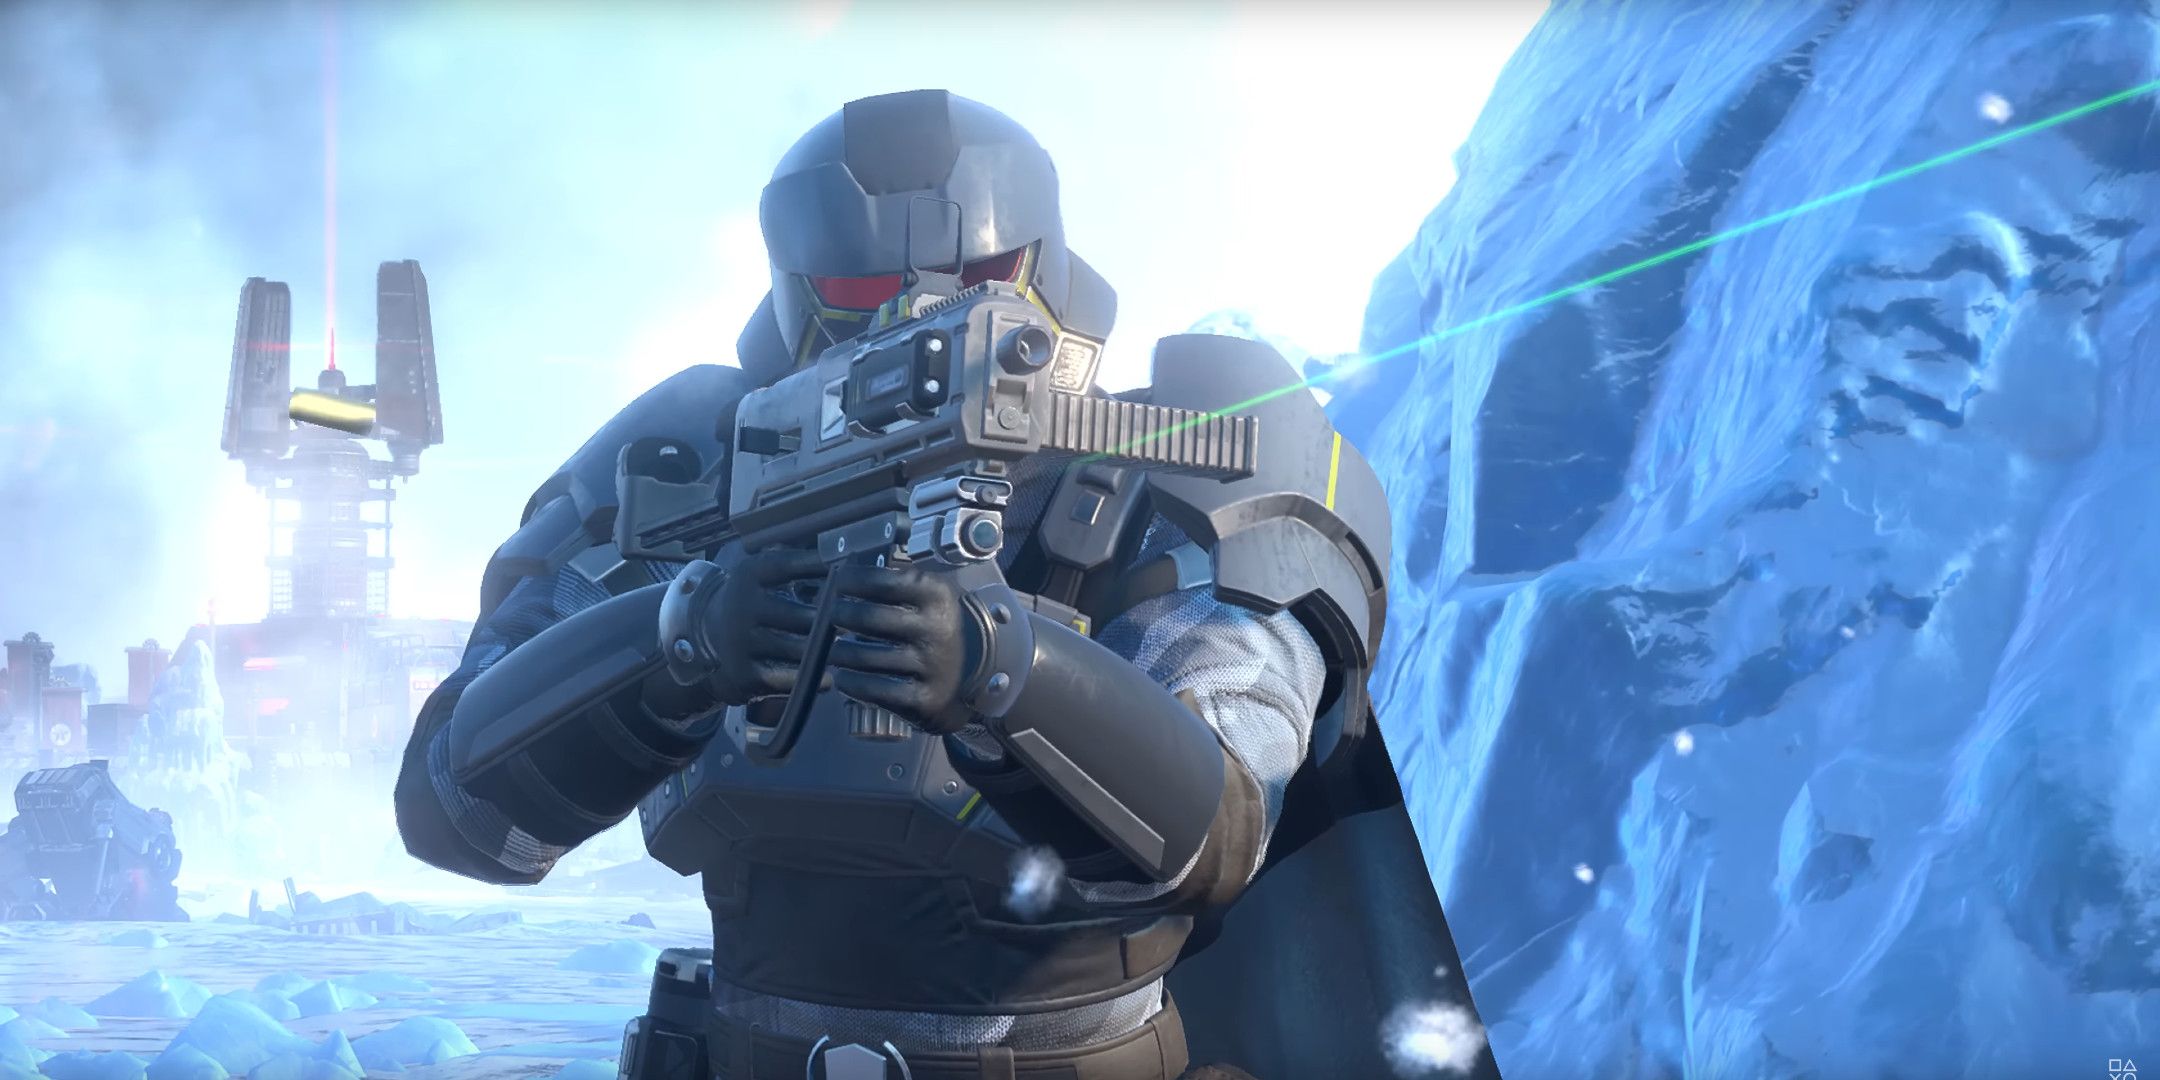 A soldier on a snowy planet aiming a rifle off screen